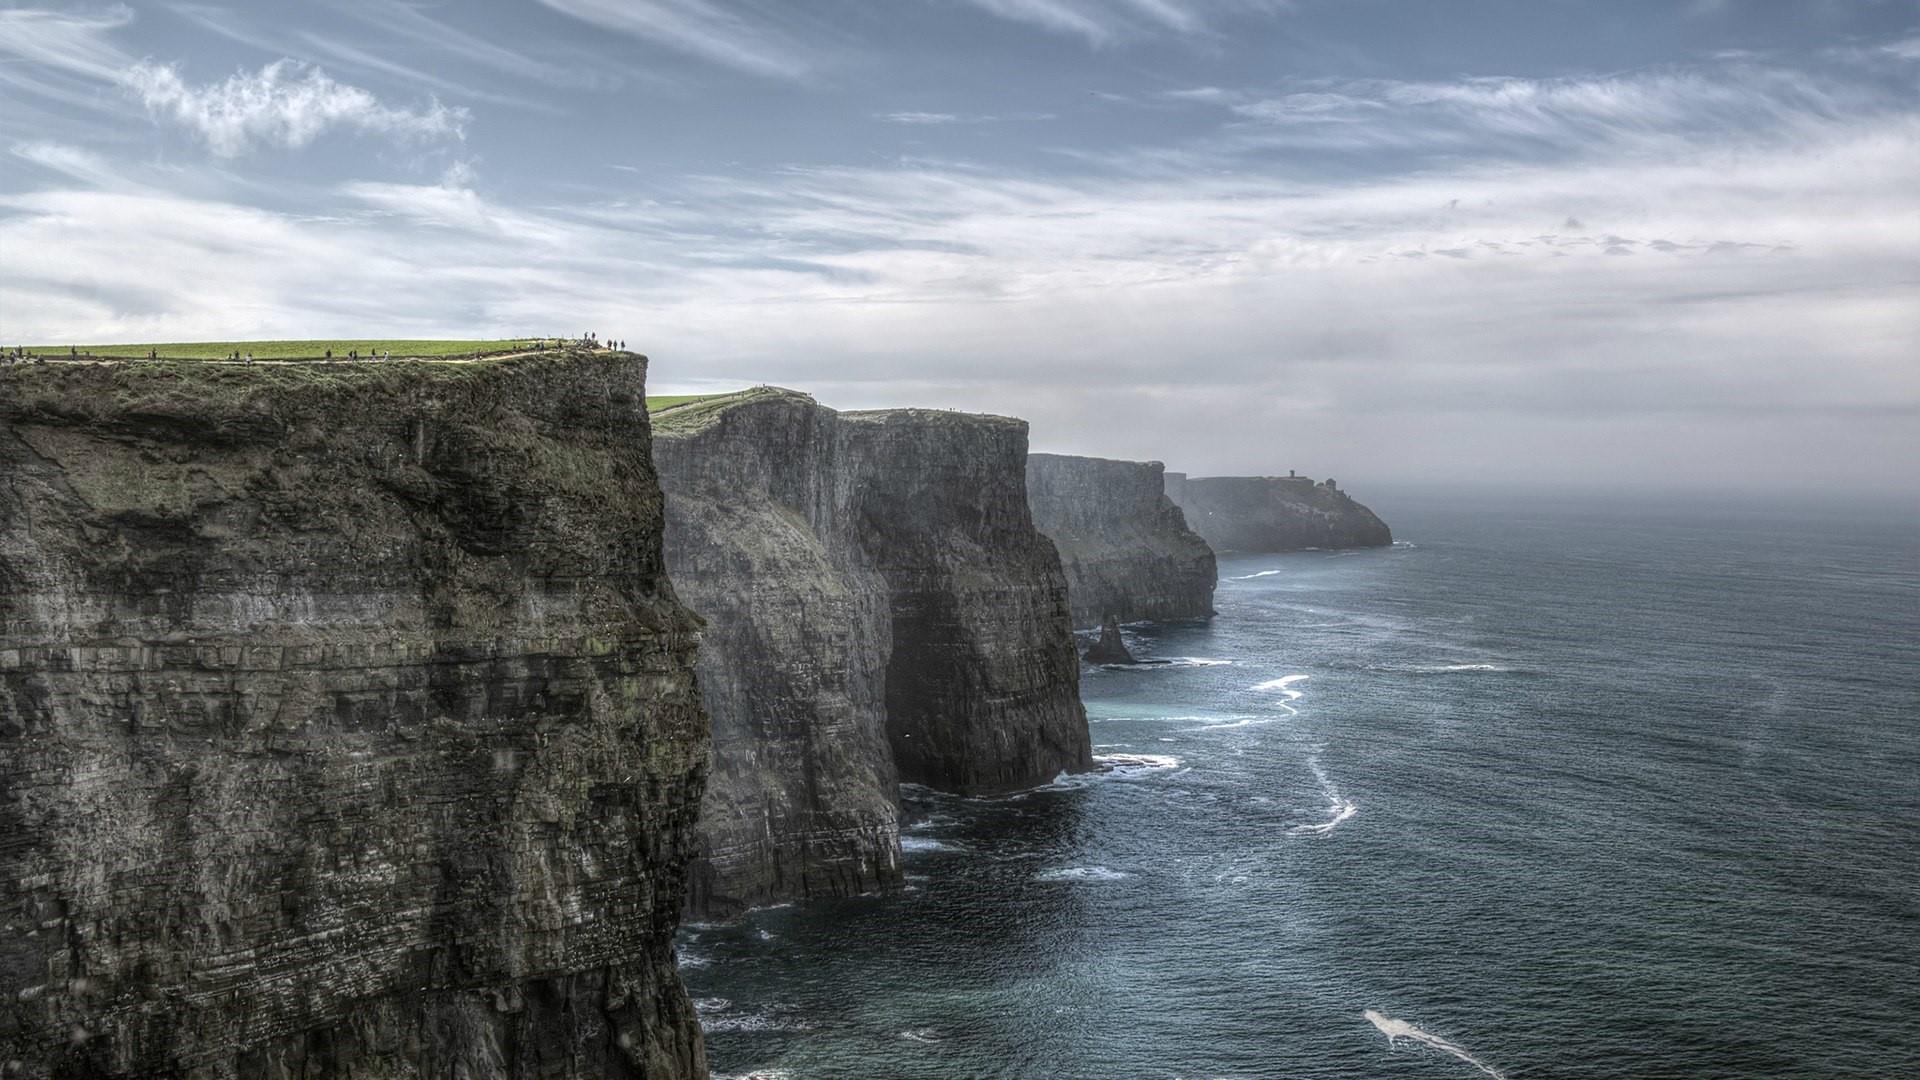 Cliffs of Moher Wallpapers and Background Images   stmednet 1920x1080